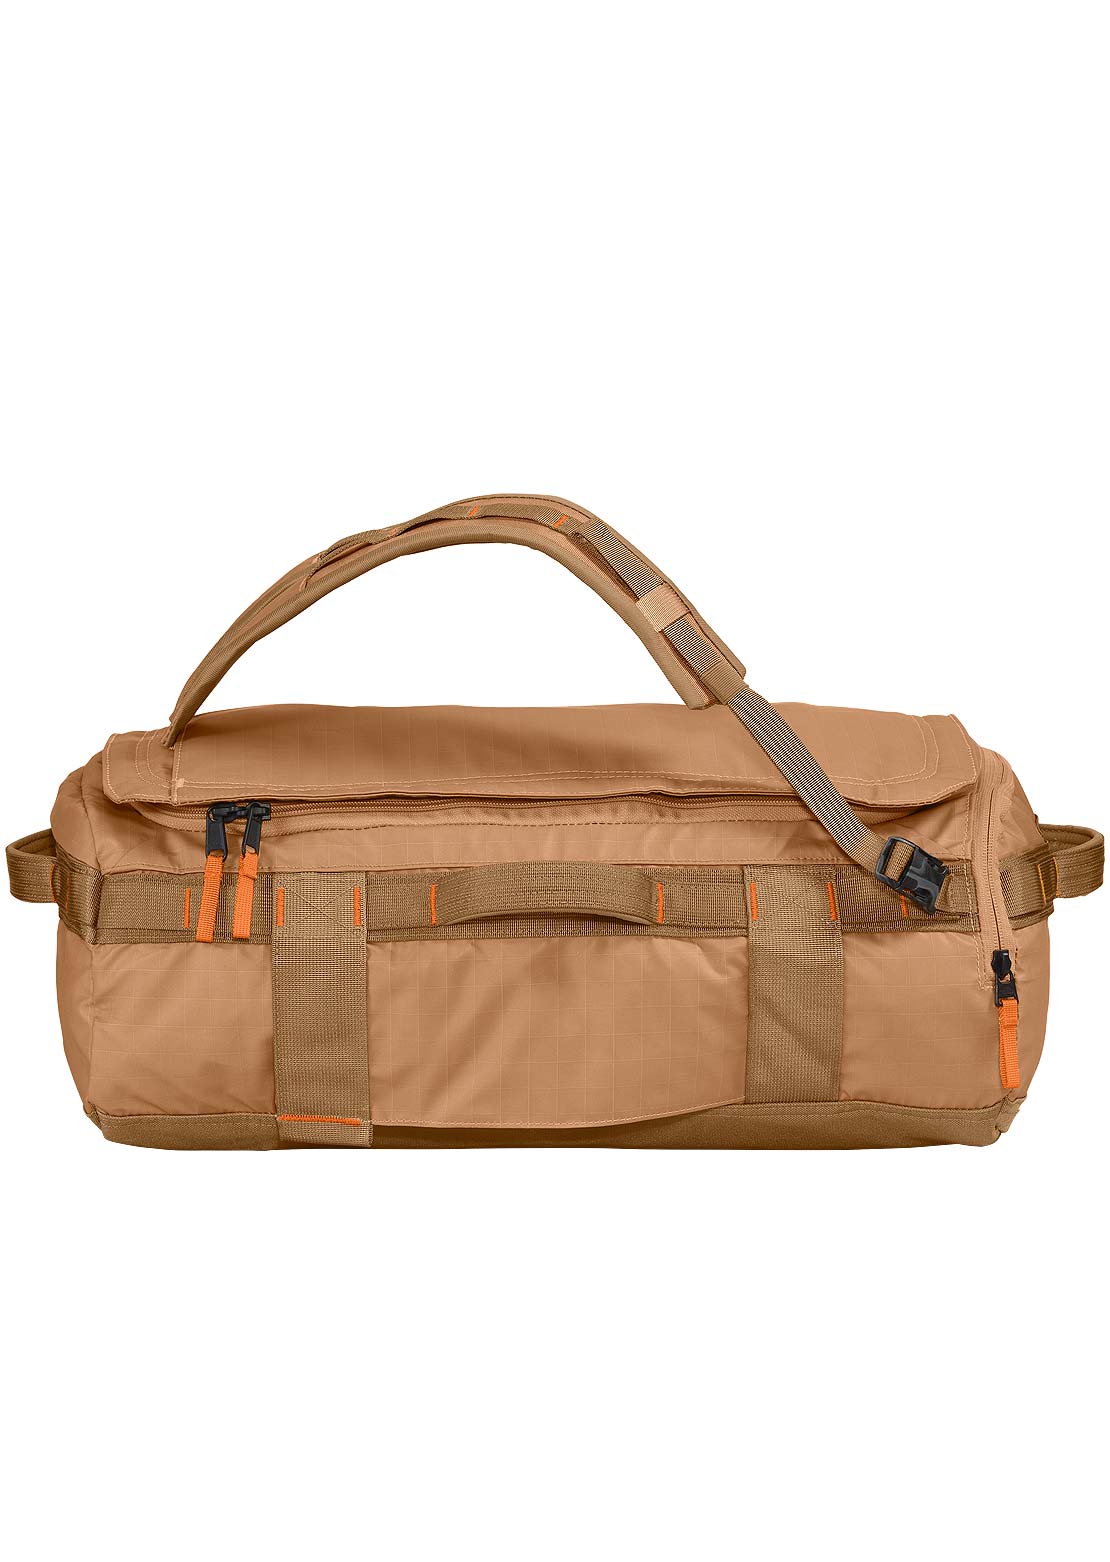 The North Face Base Camp Voyager 32 L Duffel Bag Almond Butter/Utility Brown/Mandarin